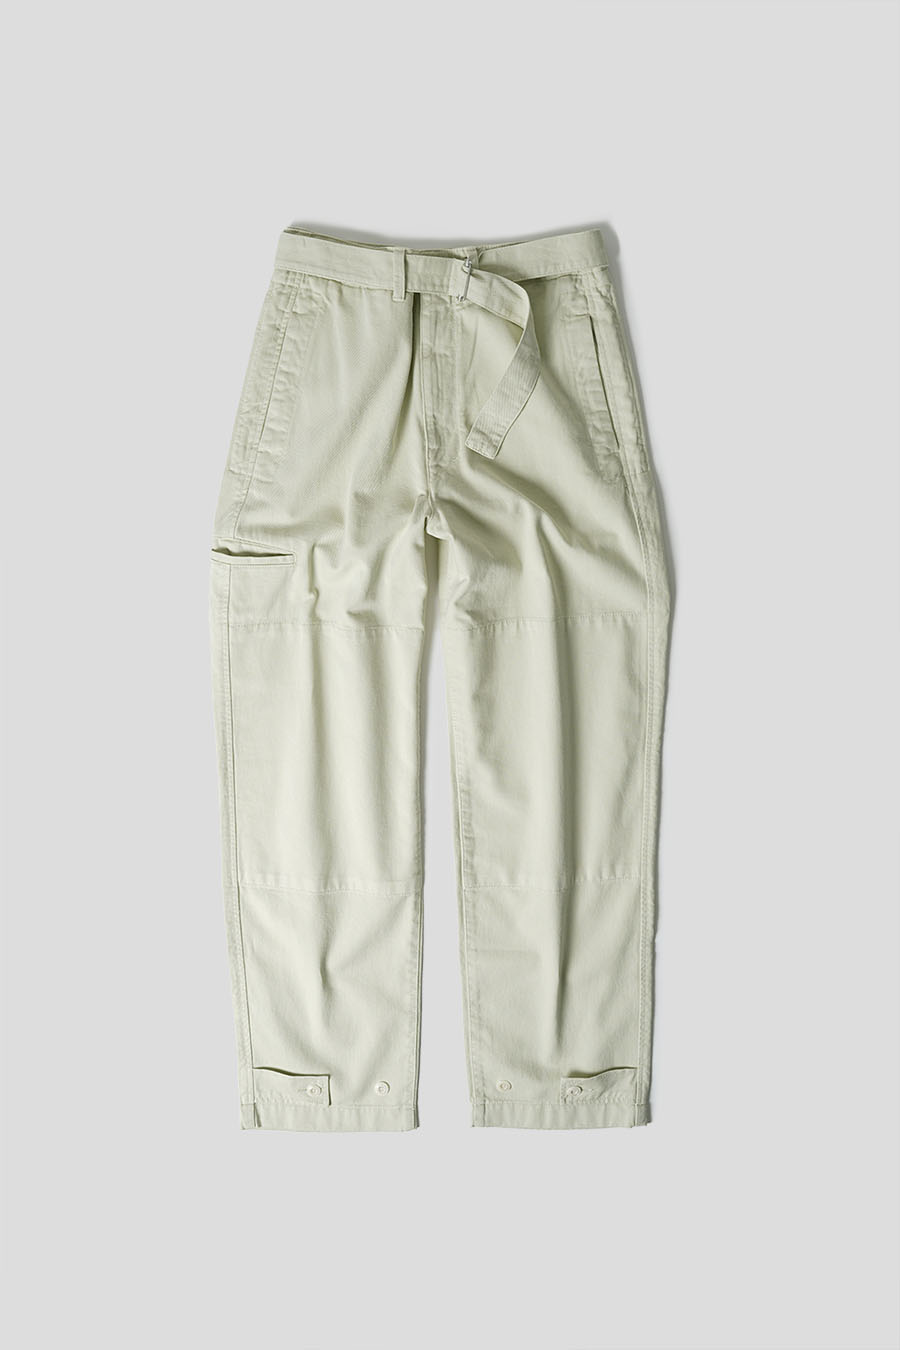 LEMAIRE - LIGHT SAGE MILITARY TROUSERS - LE LABO STORE